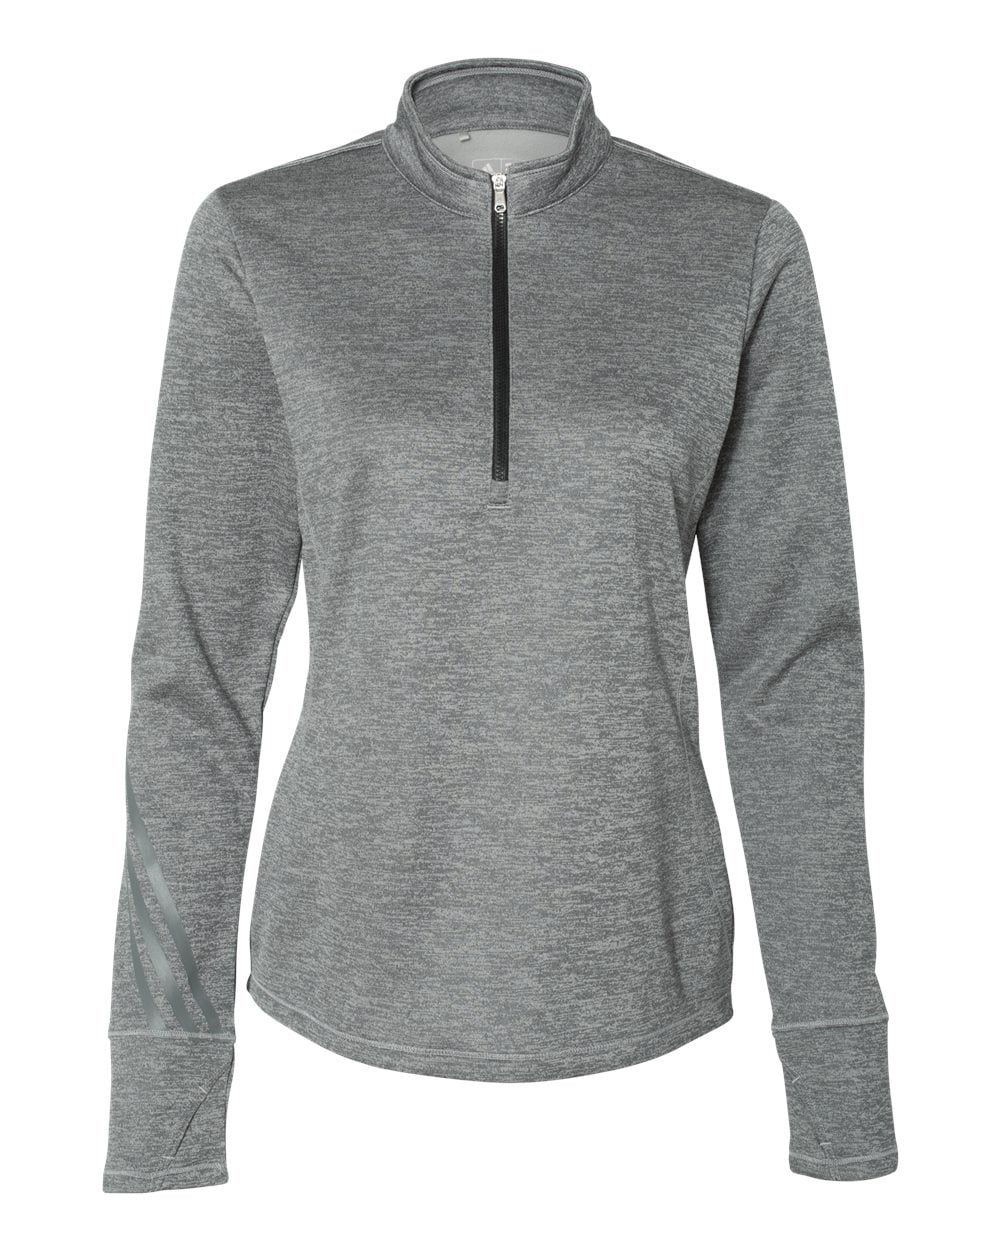 Adidas - Women's Brushed Terry Heather Quarter-Zip - Color - Mid Grey ...